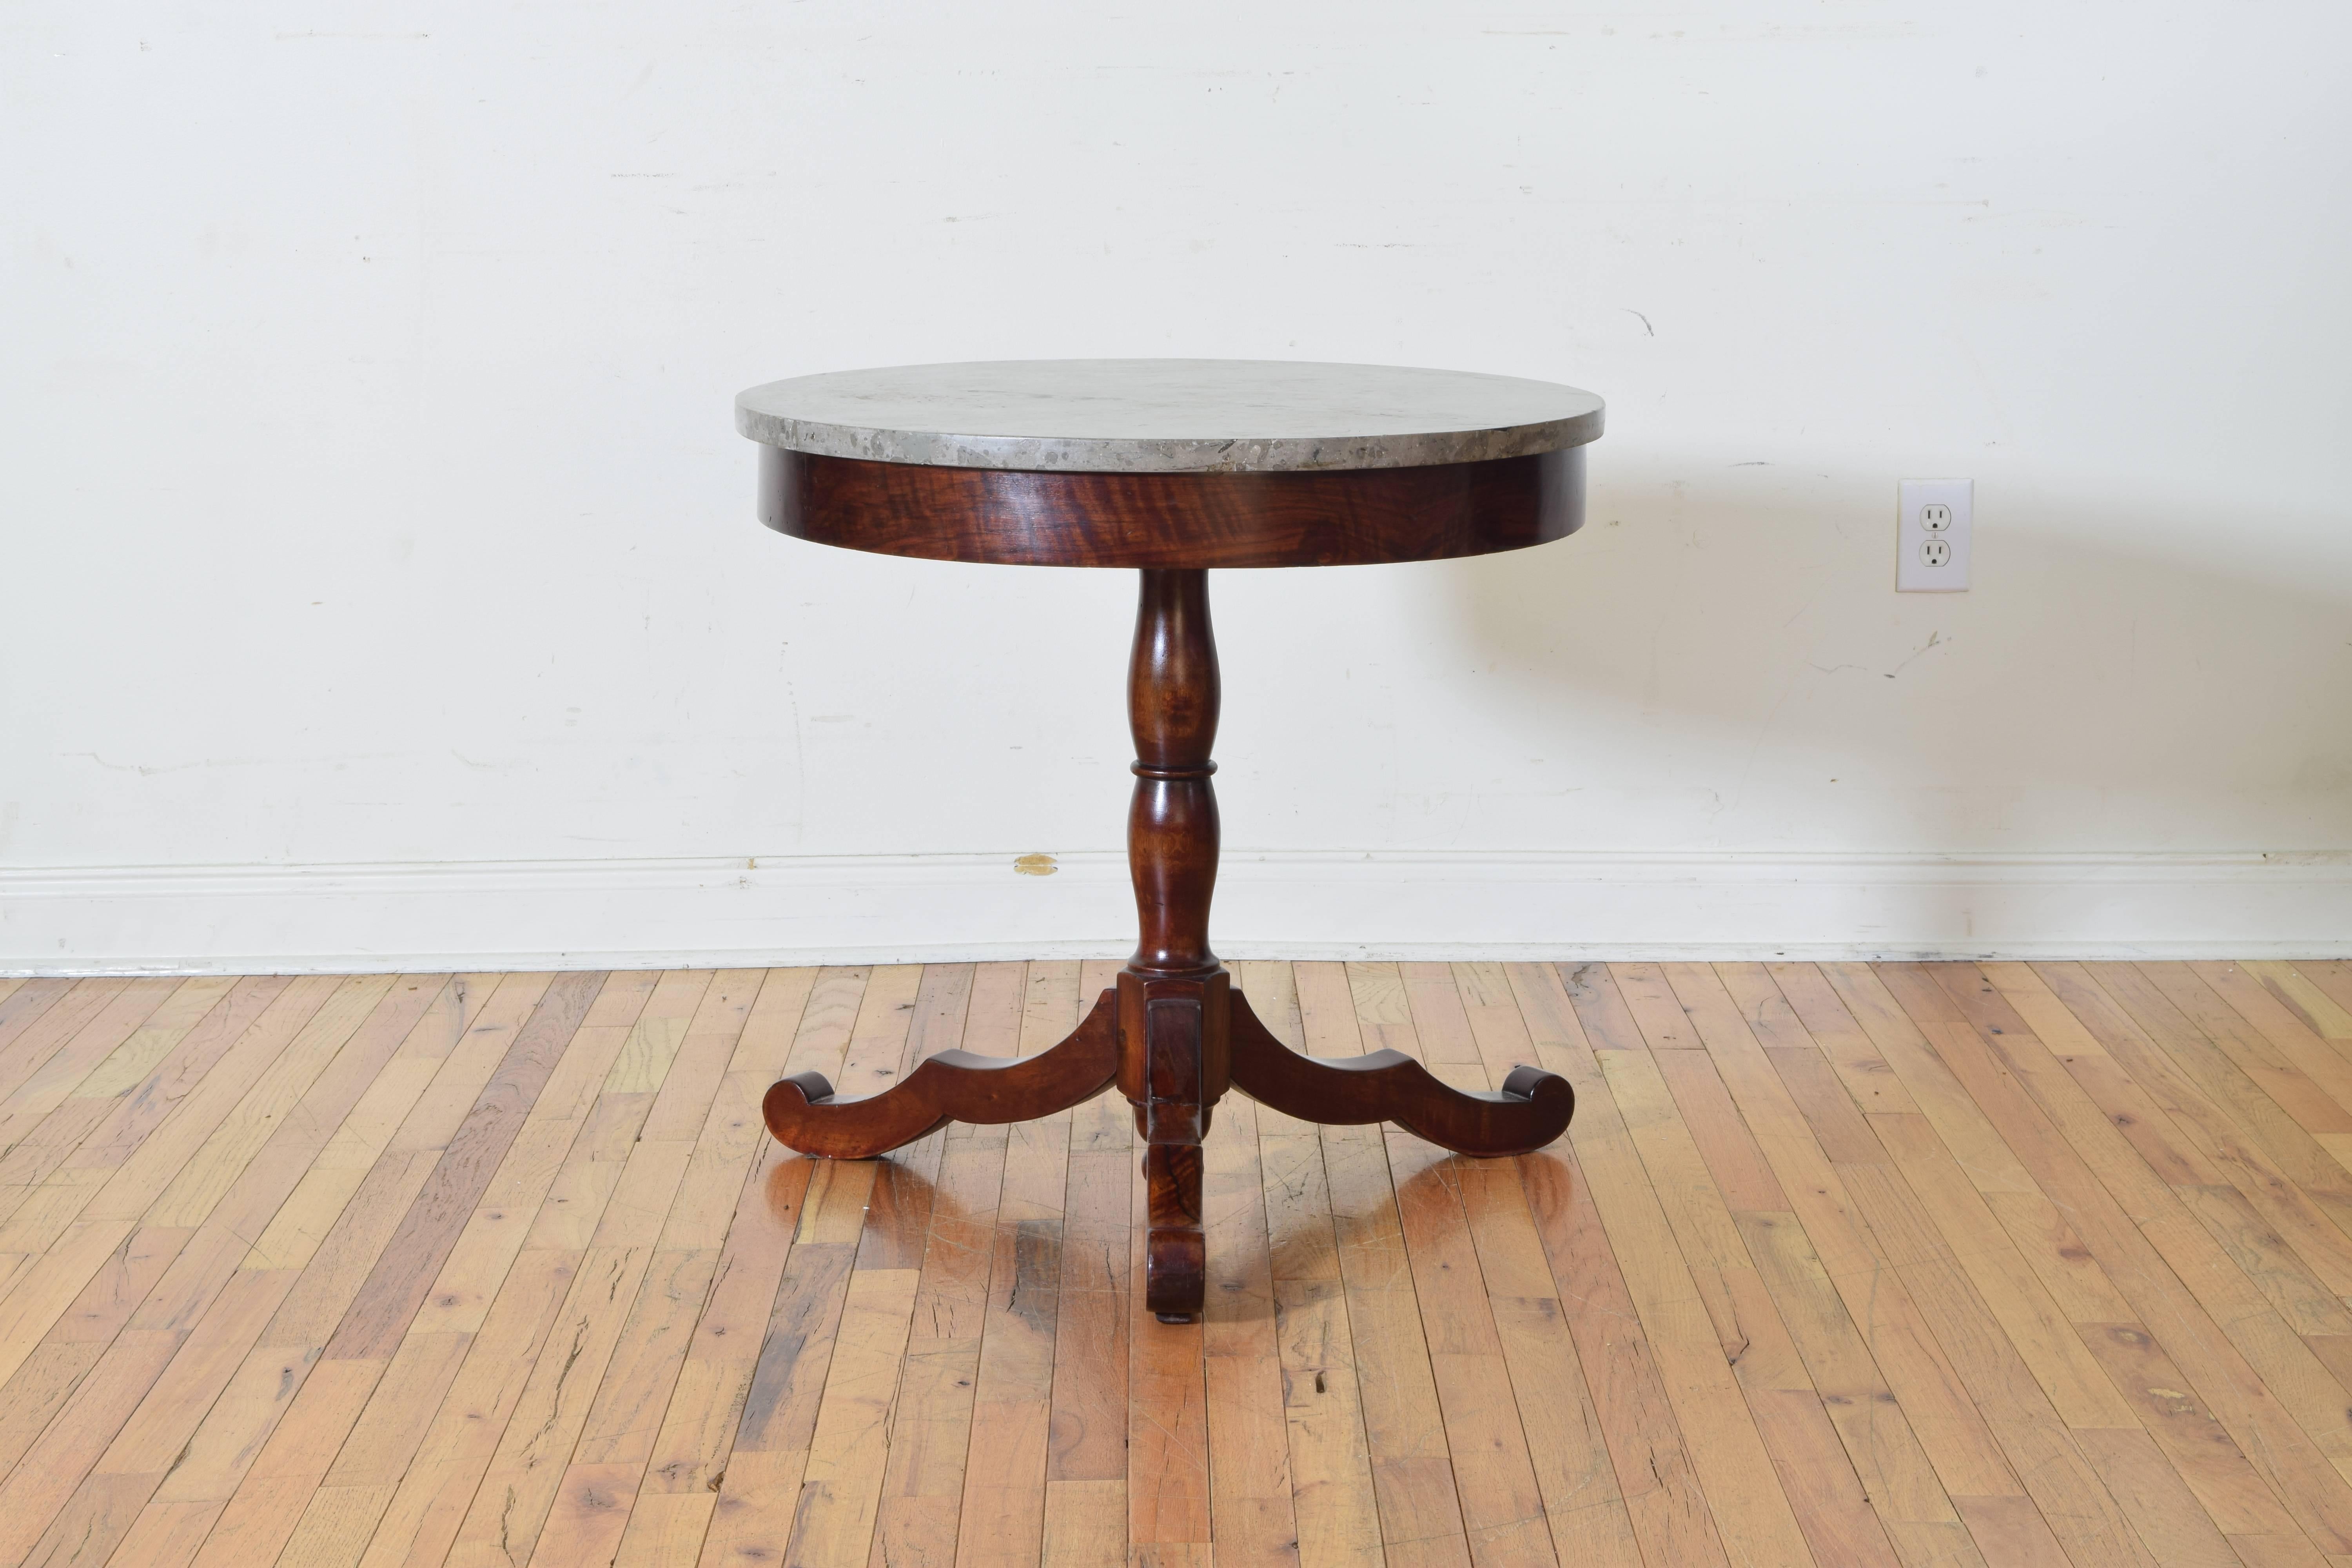 The circular grey marble top resting atop a conforming frame and supported by a turned column above a tripartite base issuing three curved and widely splayed legs.